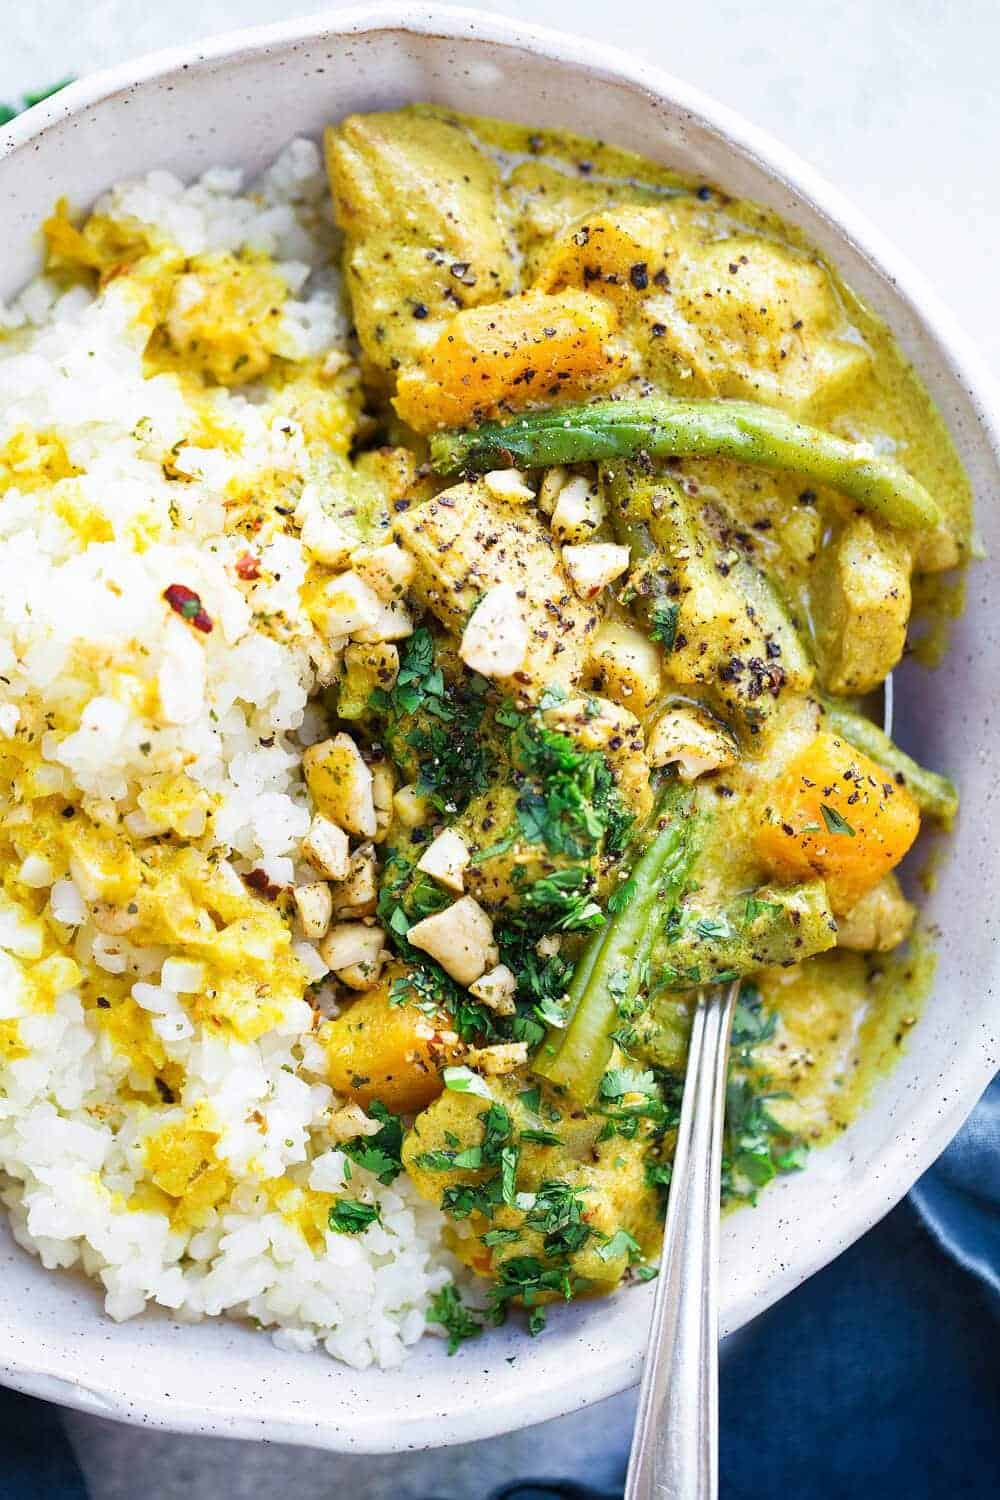 10 Minute Whole30 Curry easy whole30 dinner or lunch recipe- made with chicken thighs, butternut squash, cauliflower and greens… healthy and so easy! Easy Whole30 Curry. Whole30 curry recipes. Whole30 meal ideas. whole30 meal plan. Easy whole30 dinner recipes. Easy whole30 dinner recipes. Whole30 recipes. Whole30 lunch. Whole30 meal planning. Whole30 meal prep. Healthy paleo meals. Healthy Whole30 recipes. Easy Whole30 recipes. Easy whole30 dinner recipes.